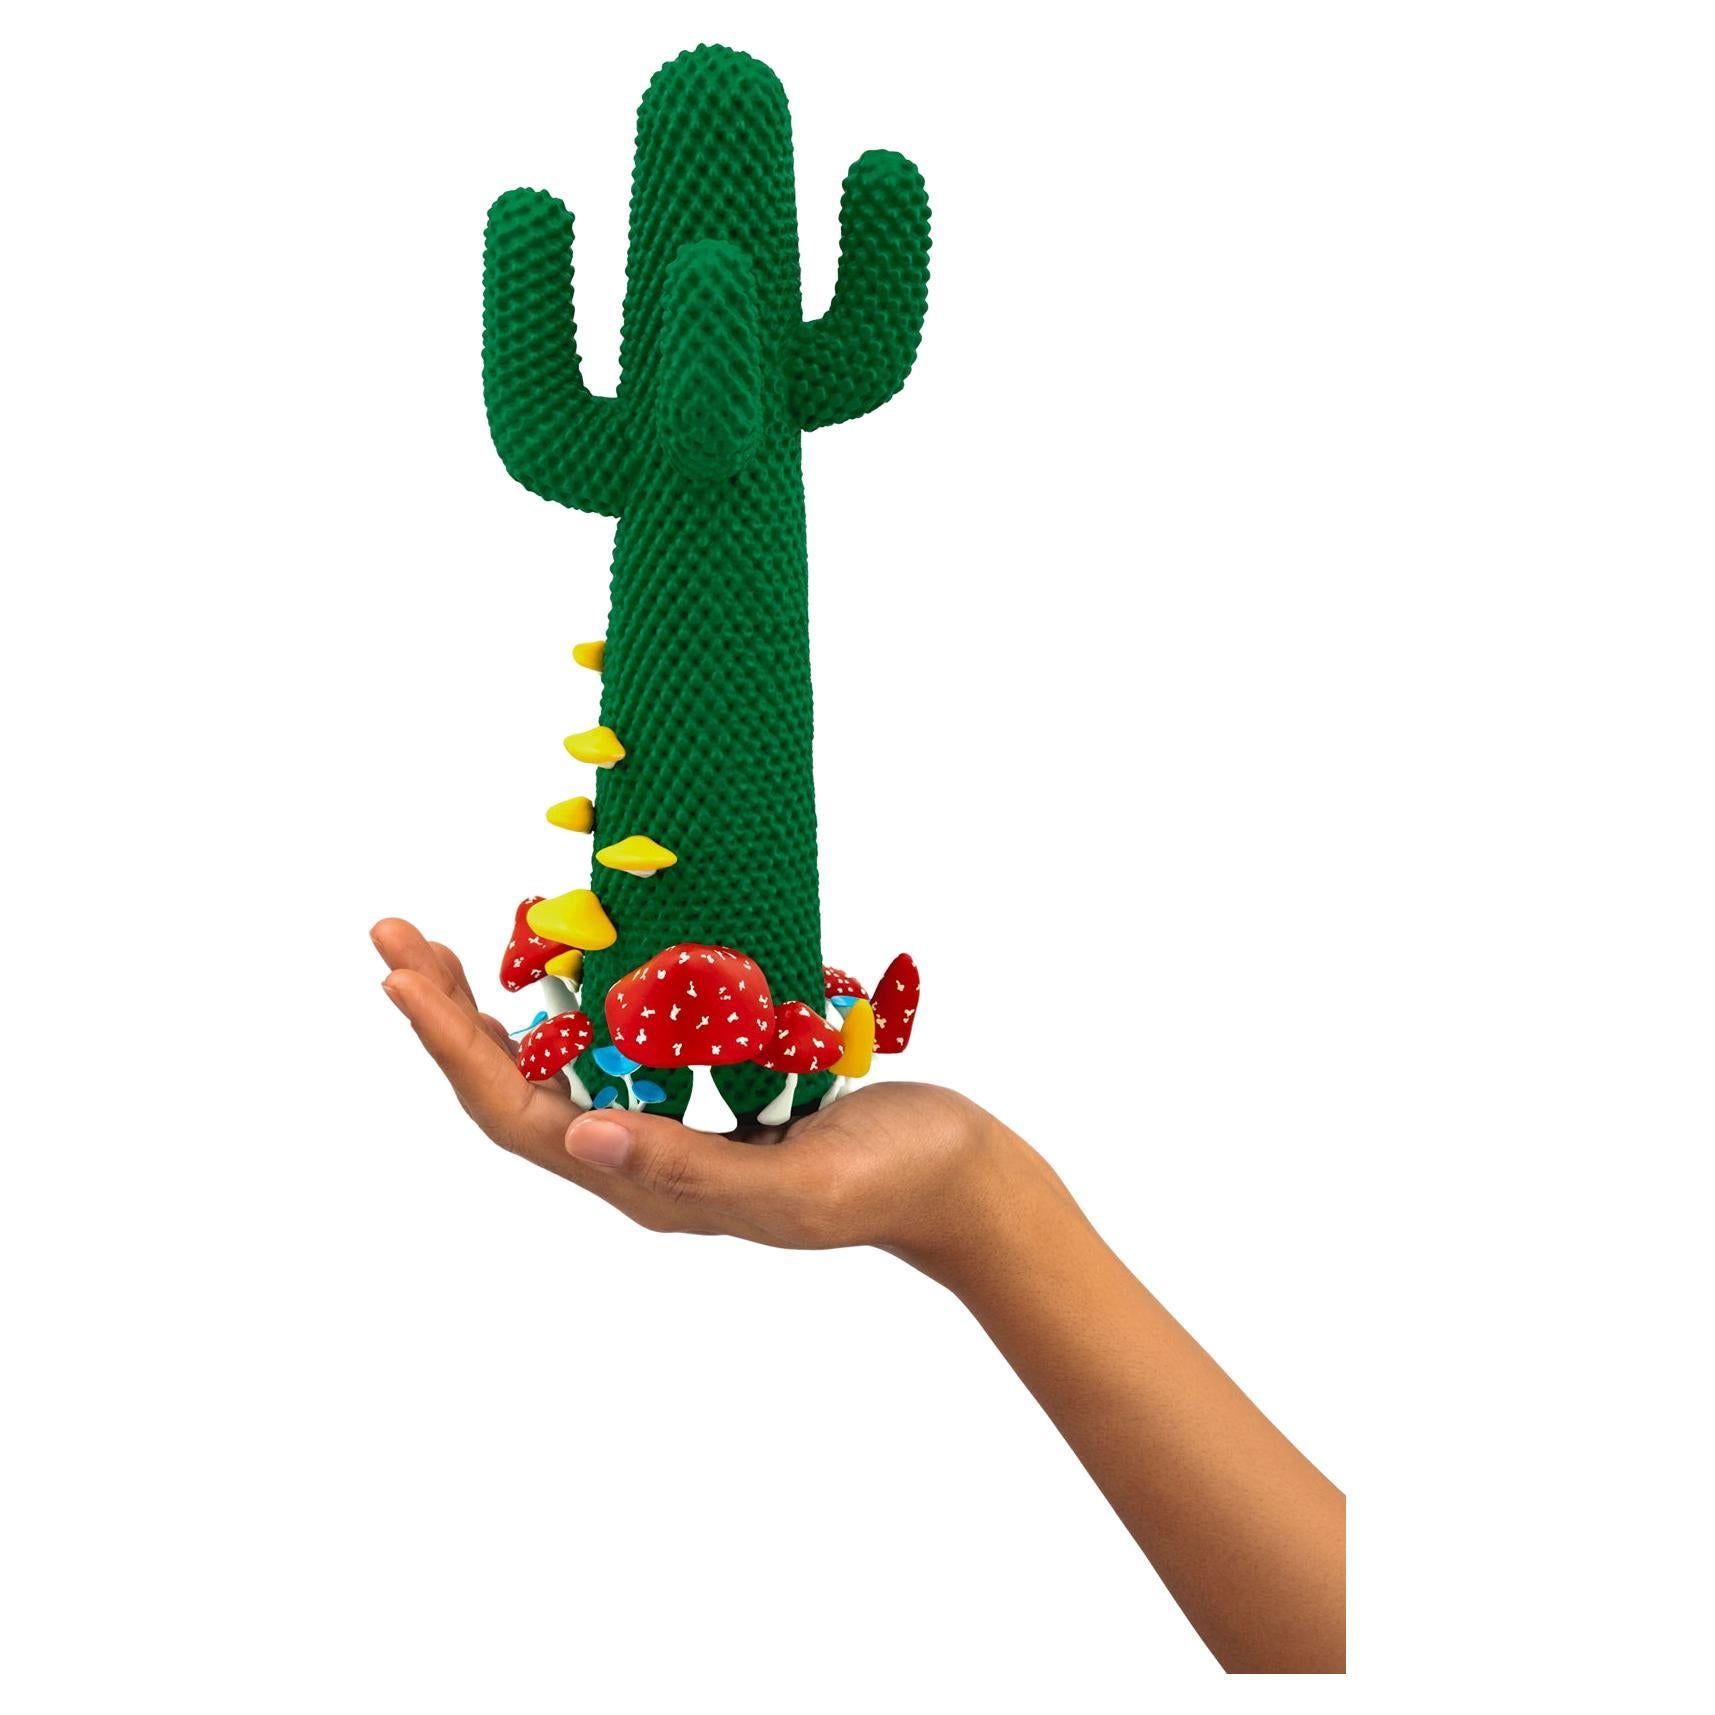 Limited edition #13/99

Gufram presents the miniaturised version of the Shroom CACTUS® created in collaboration with A$AP Rocky and the artist’s new design studio HOMMEMADE Exactly as the real-size Shroom CACTUS®, the new Guframini piece features